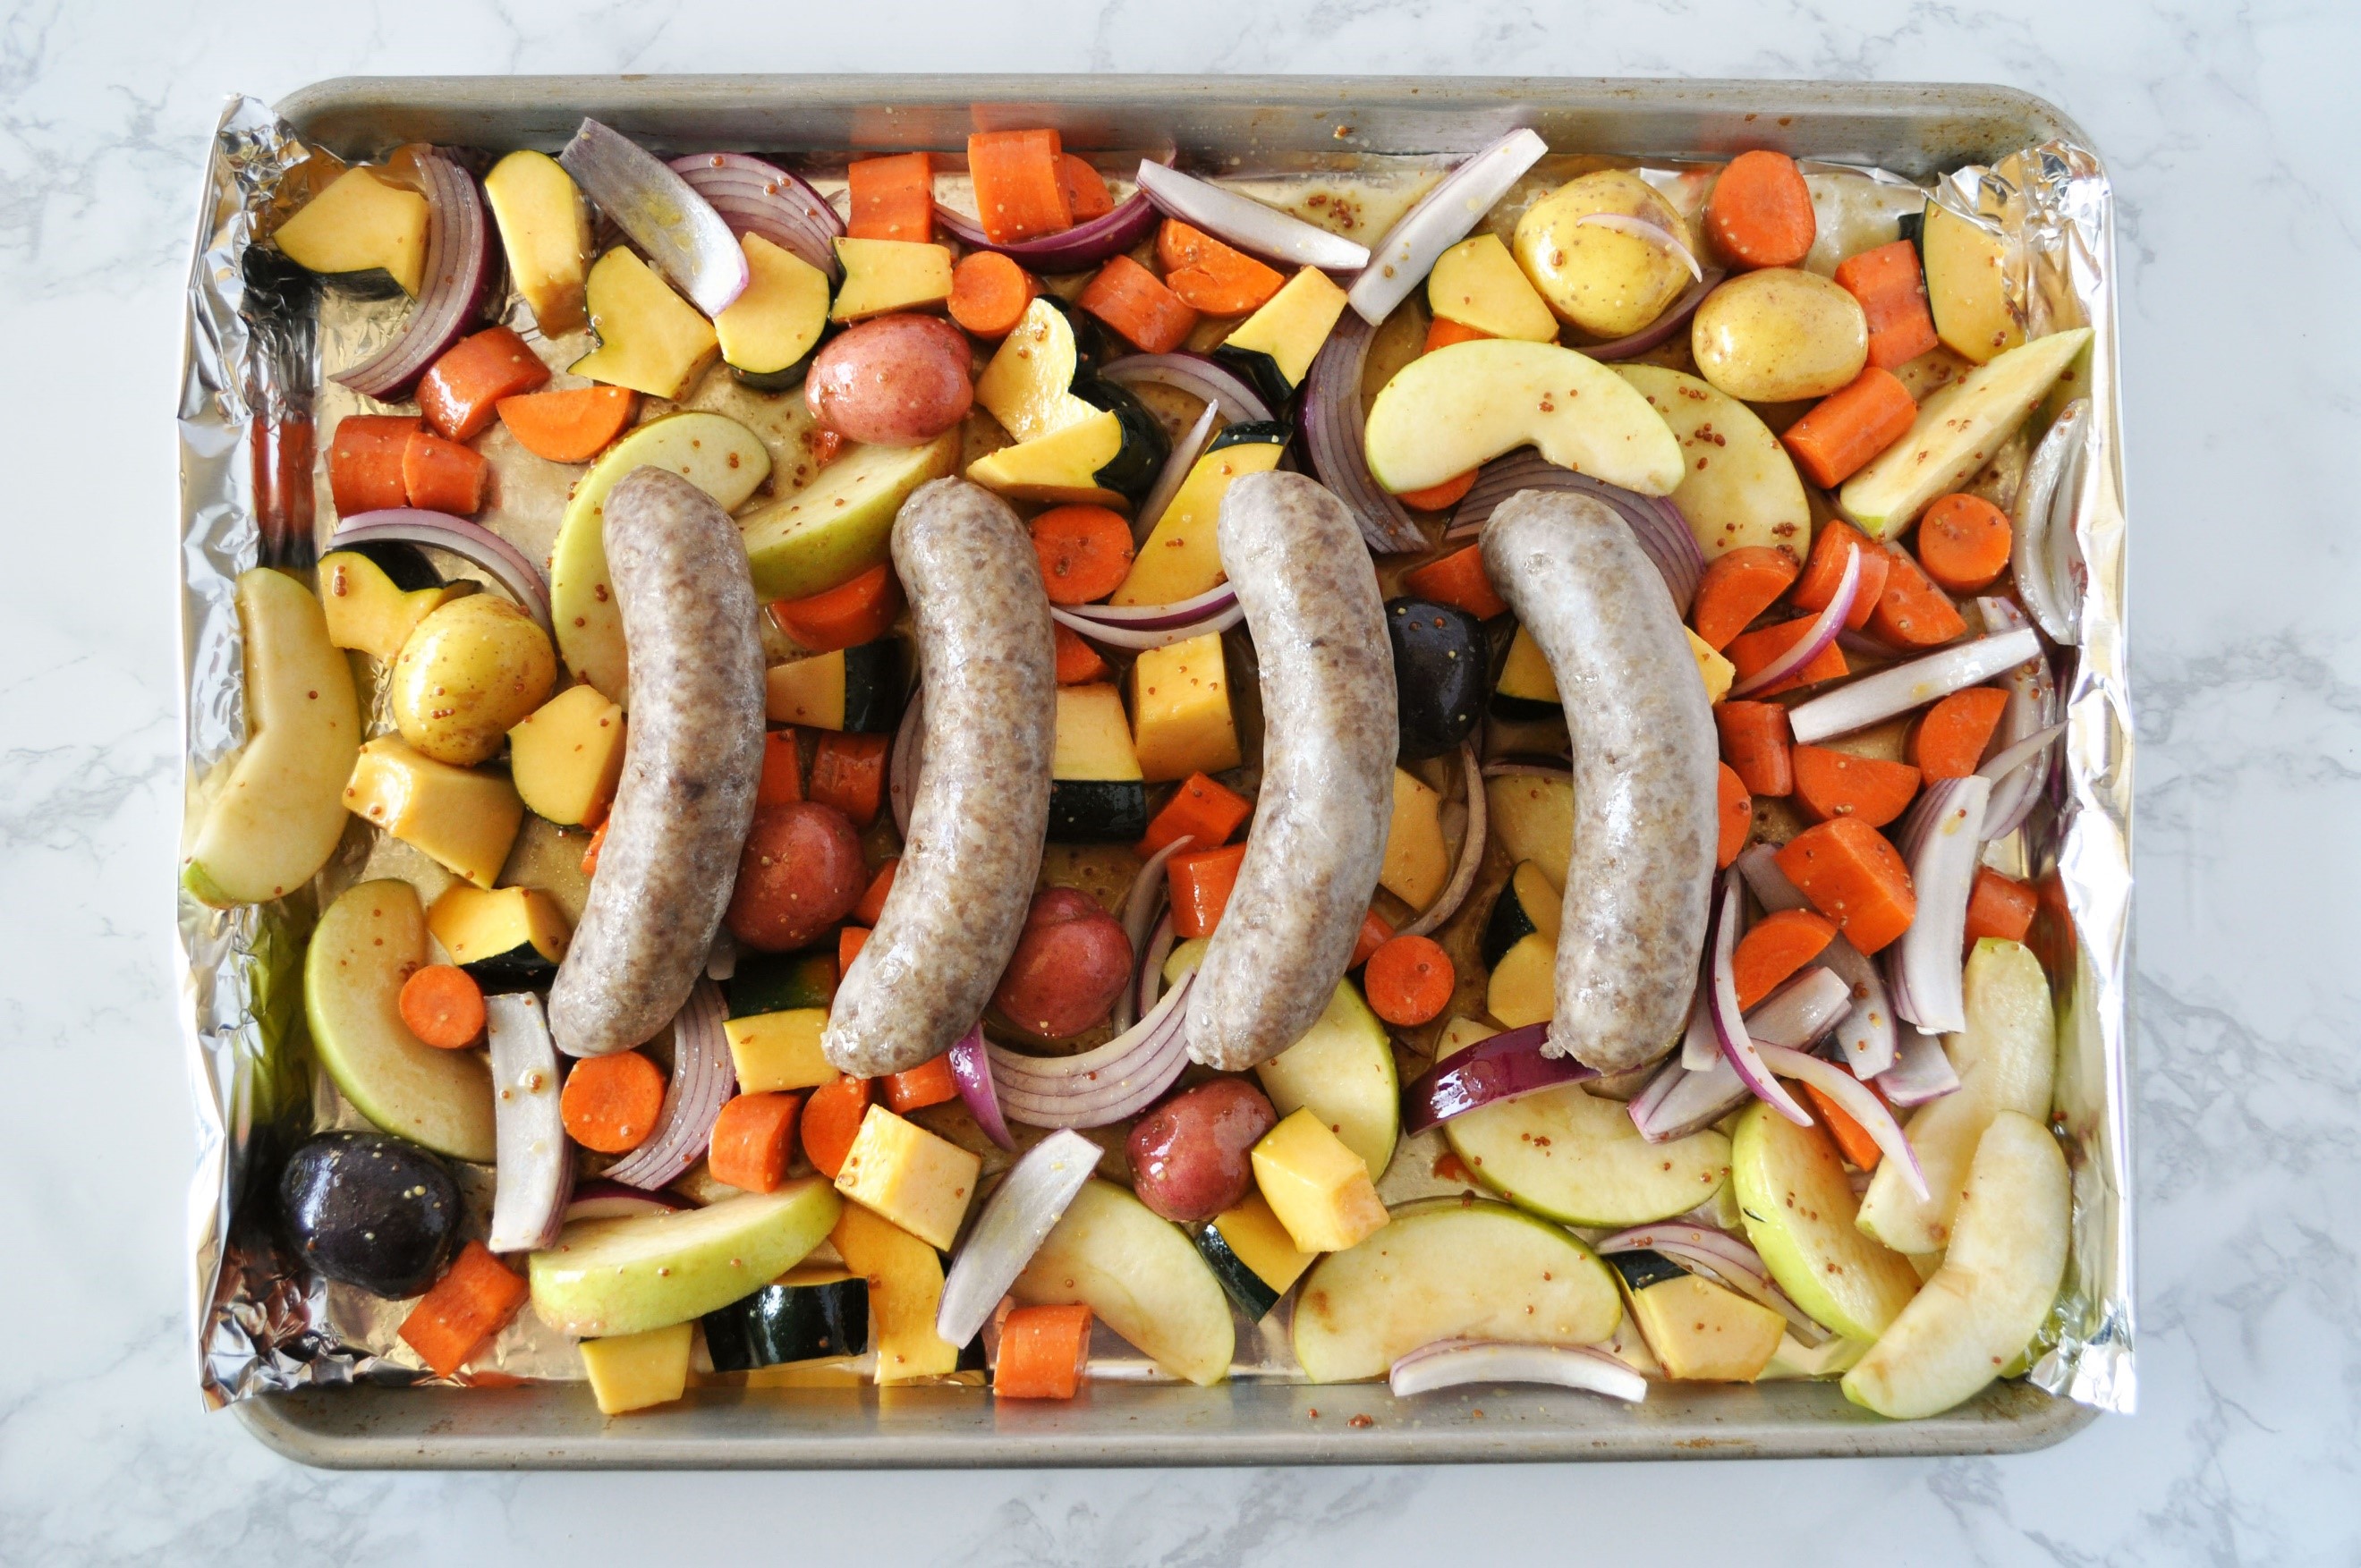 5 Sheetpan Brats and Roasted Vegetables